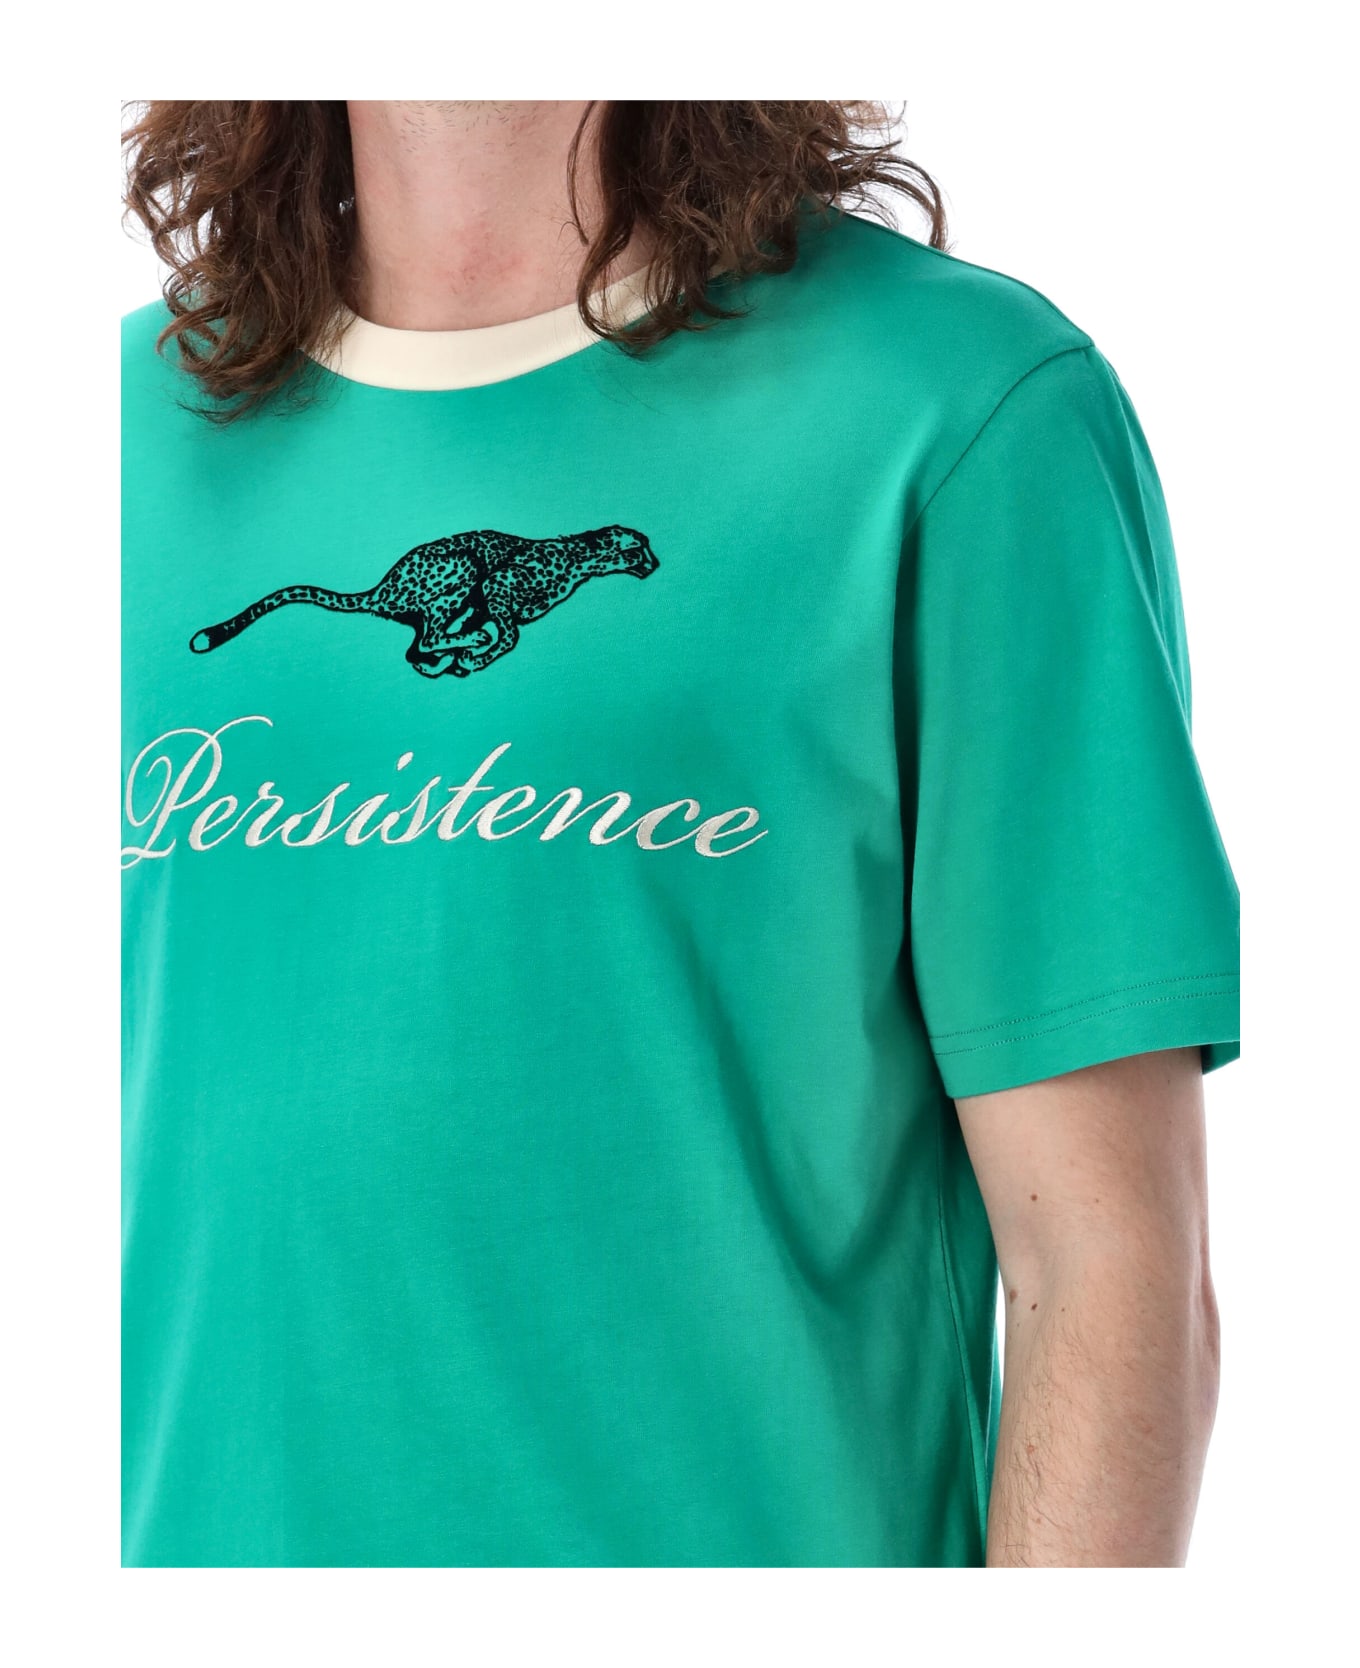 Wales Bonner Resilience T-shirt - GREEN